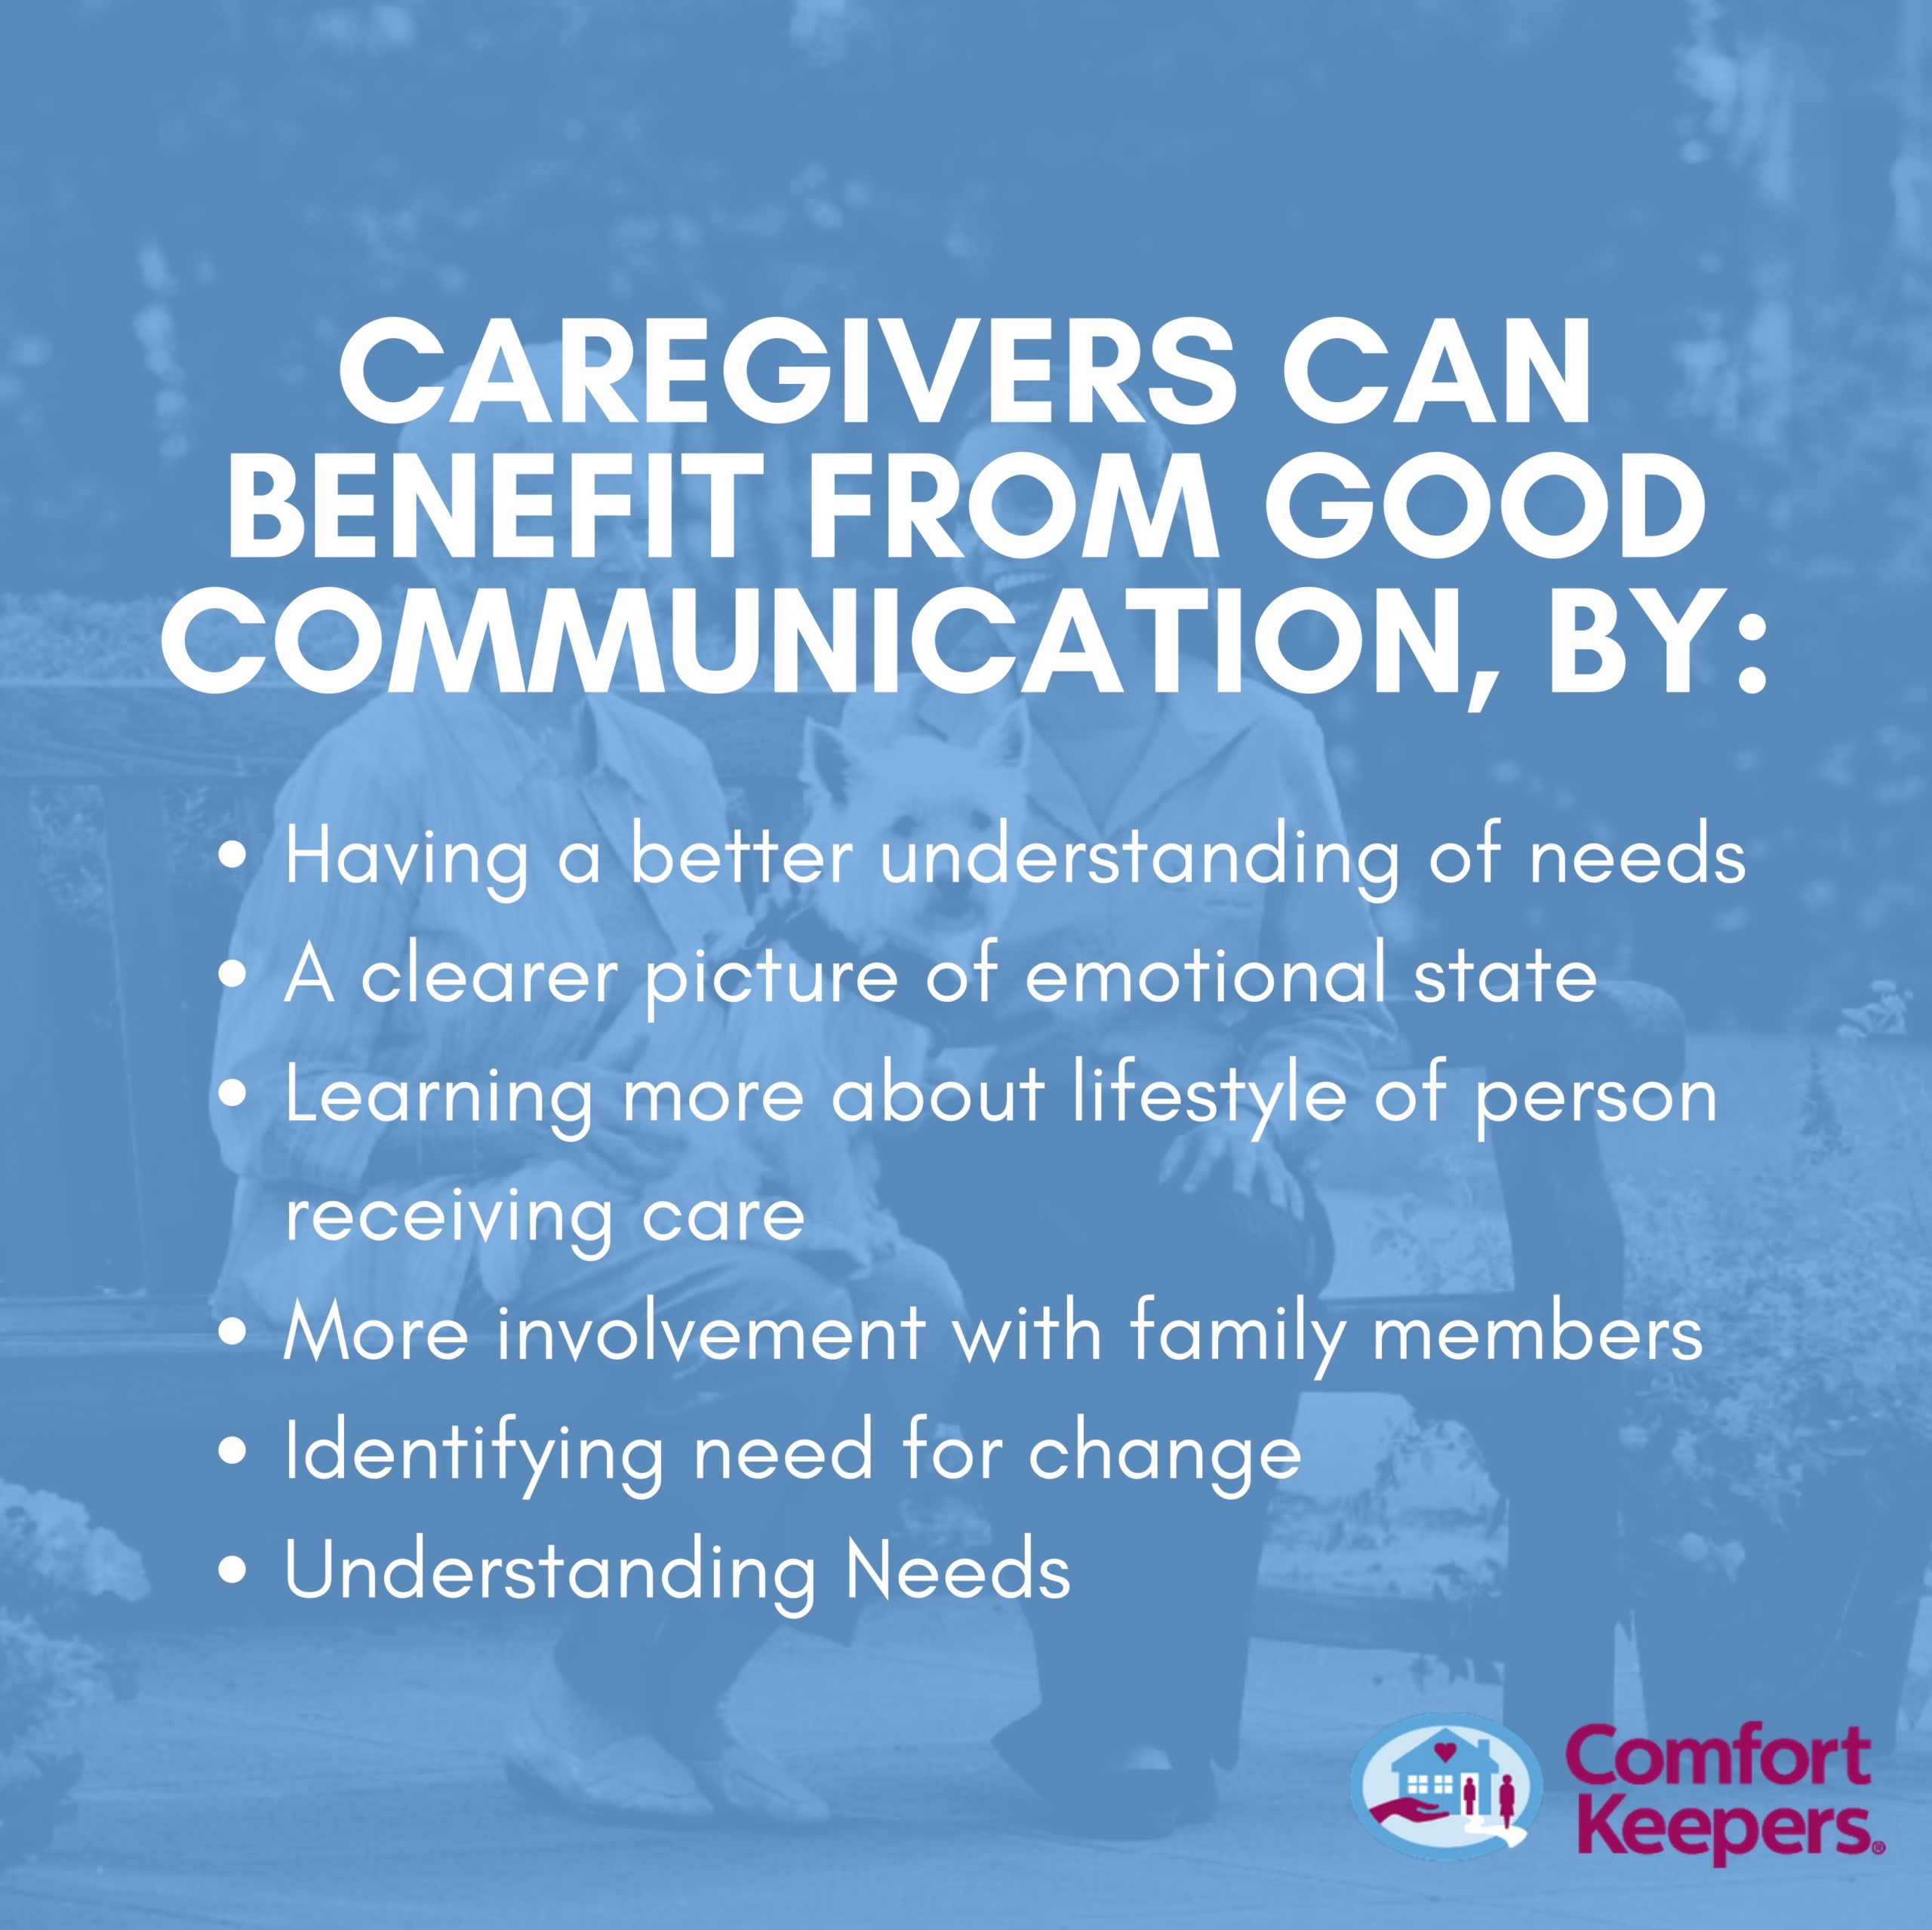 Home Care and Communication Key | Caregivers can benefit from good communication, by: - Having a better understanding of needs - a clearer picture of emotional state - learning more about lifestyle pf person receiving care - more involvement with family members - identifying need for change - understanding needs